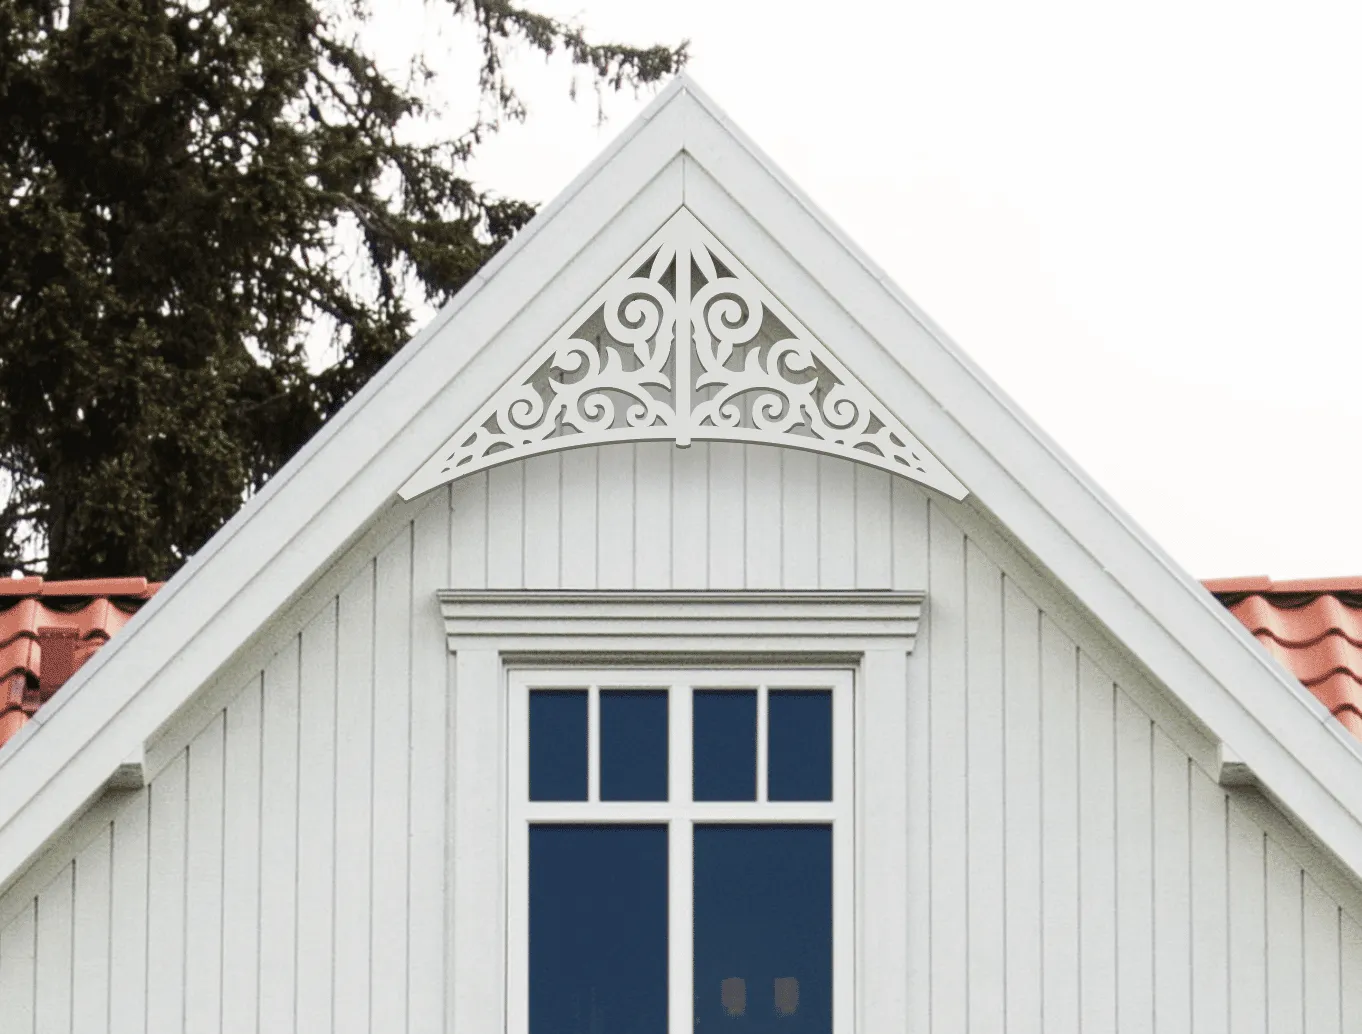 Gable pediment 011 - A white house with decorative wooden victorian millwork as house decoration for roof and gable end.